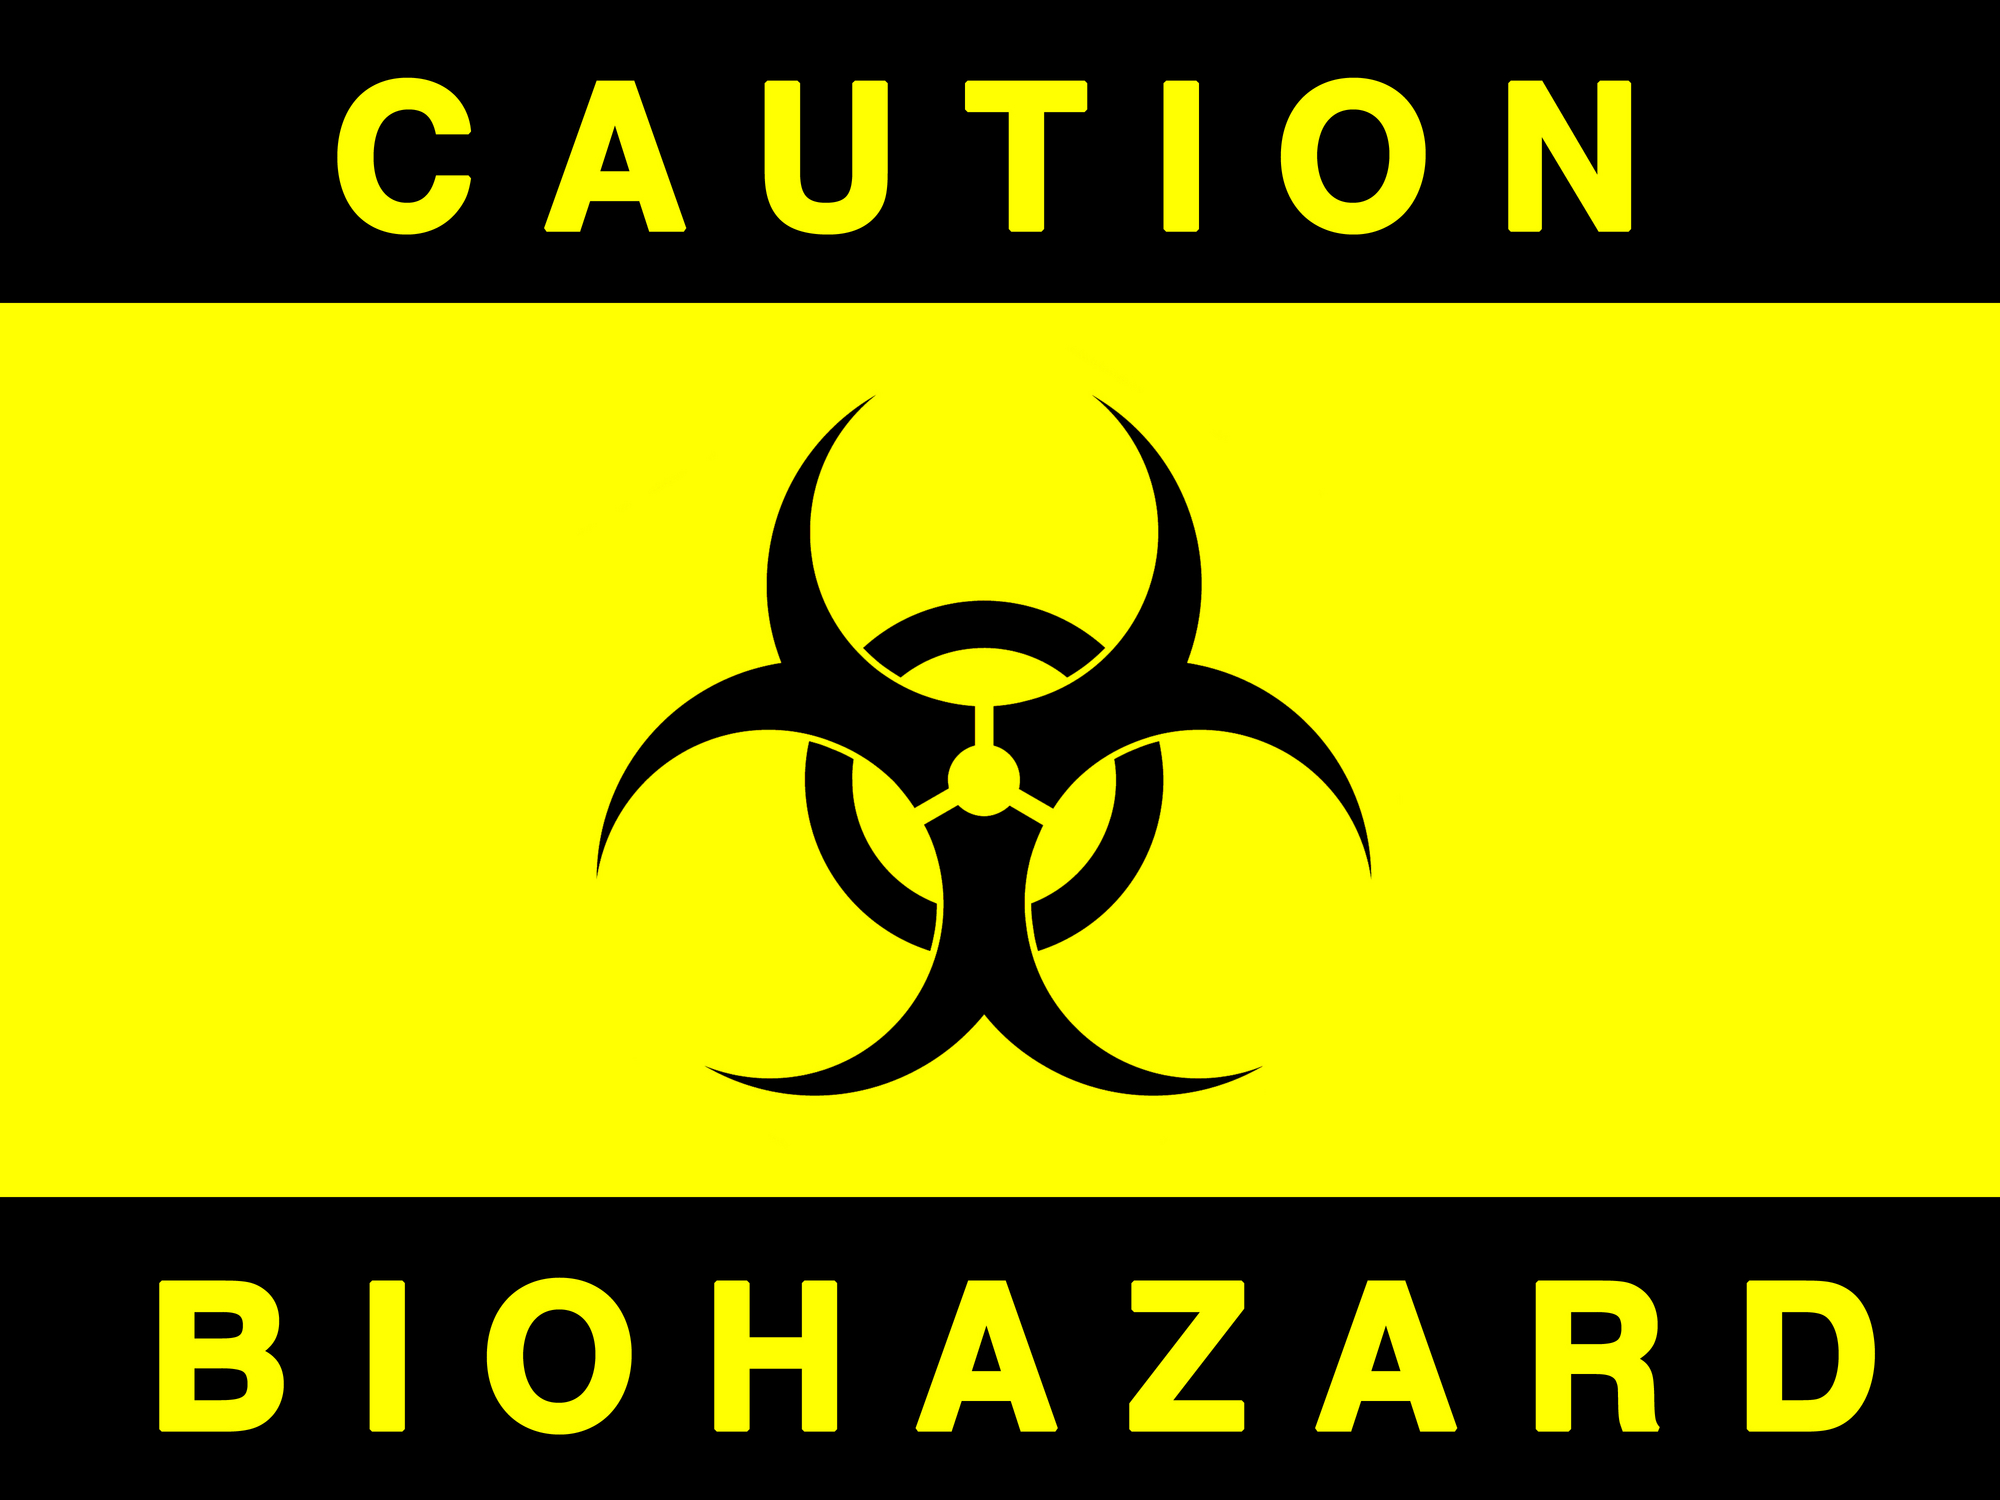 Free Biohazard Sign Printable, Download Free Clip Art, Free Clip Art on